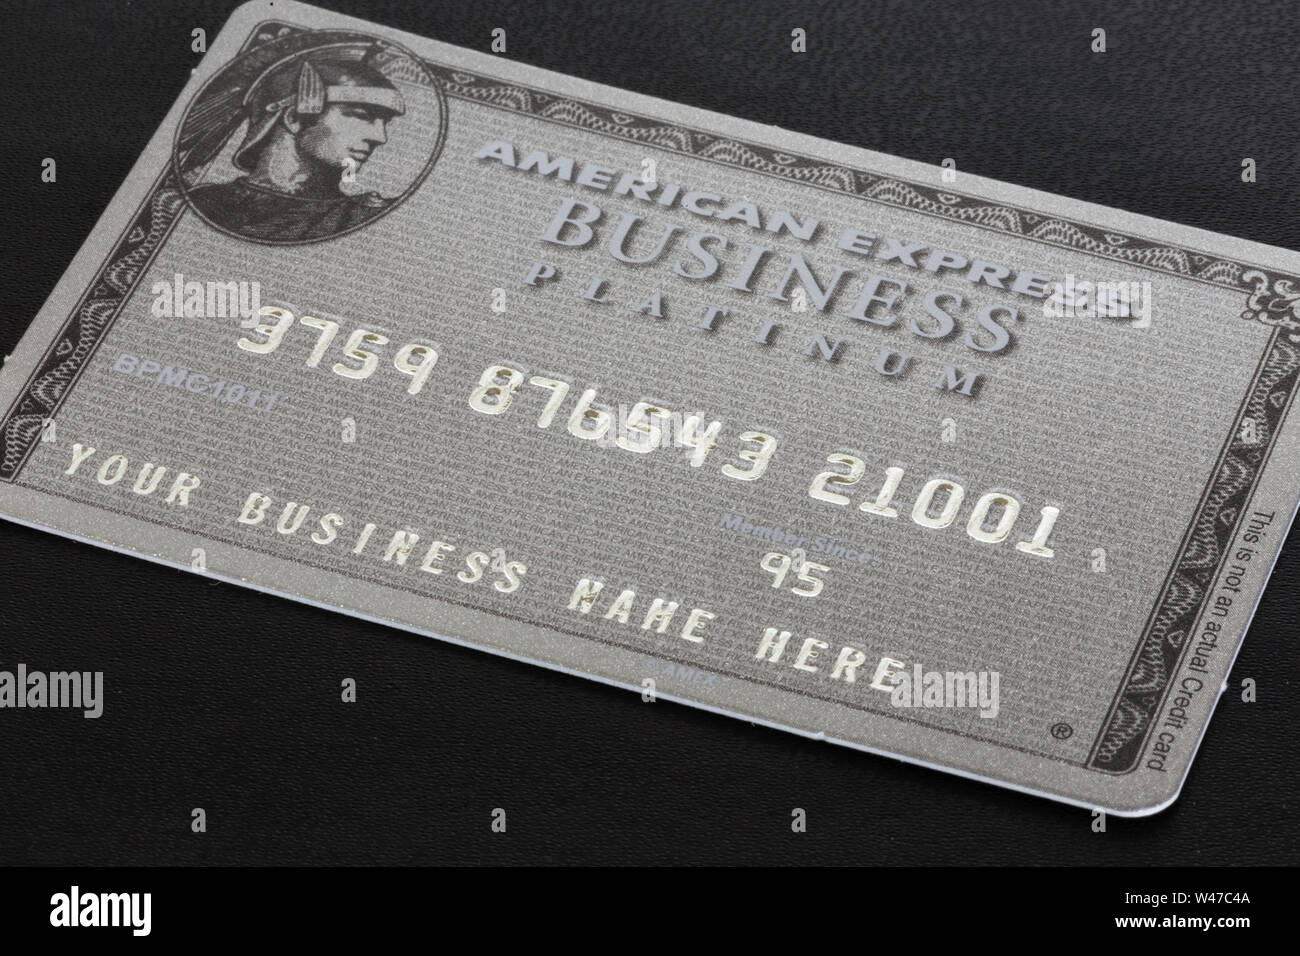 American Express Business Credit Card, USA Stock Photo